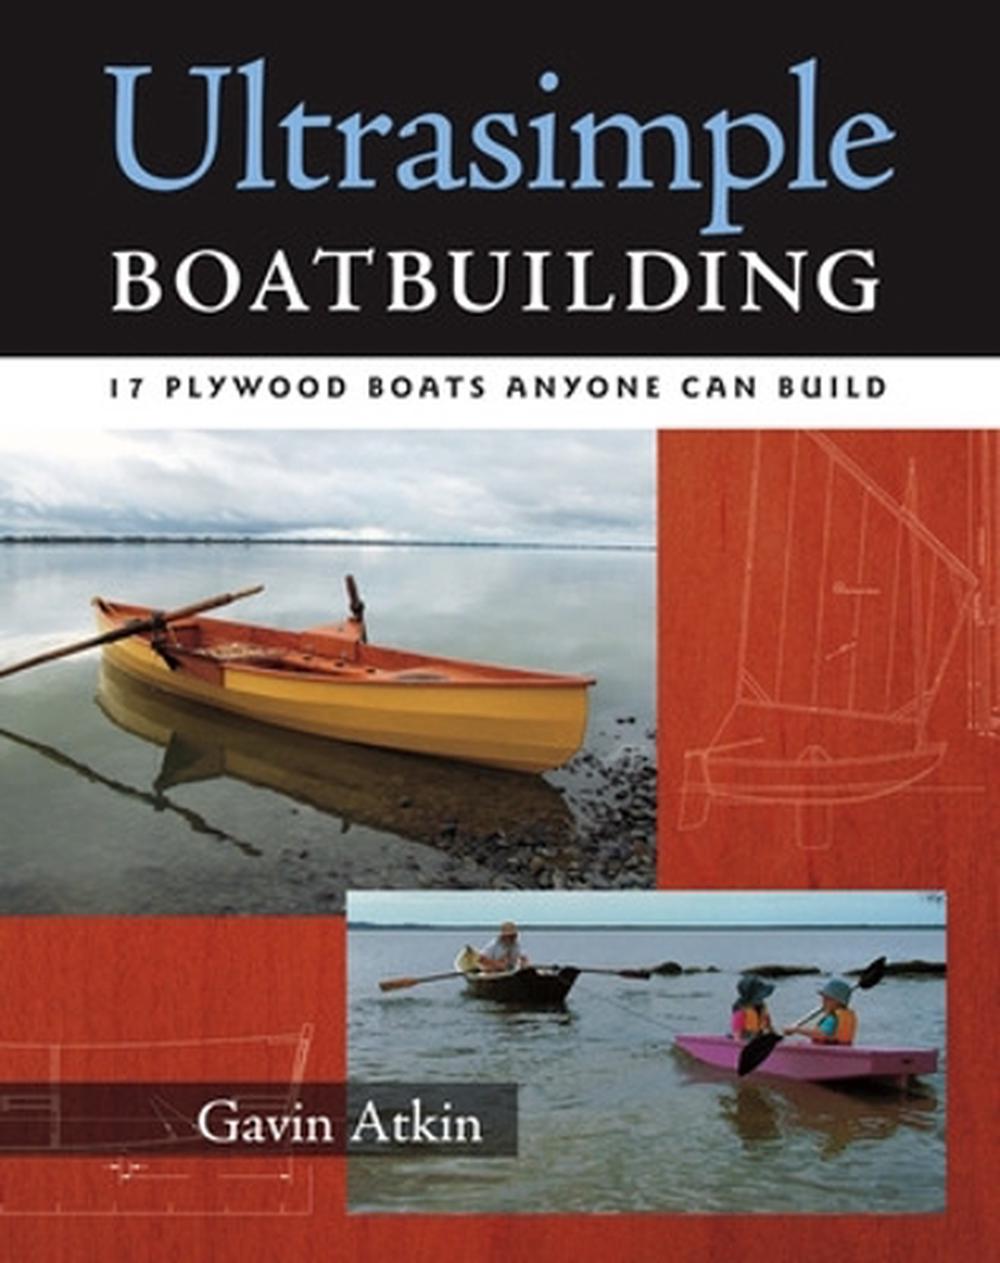 Ultrasimple Boatbuilding: 17 Plywood Boats Anyone Can Build by Gavin Atkin, Paperback ...